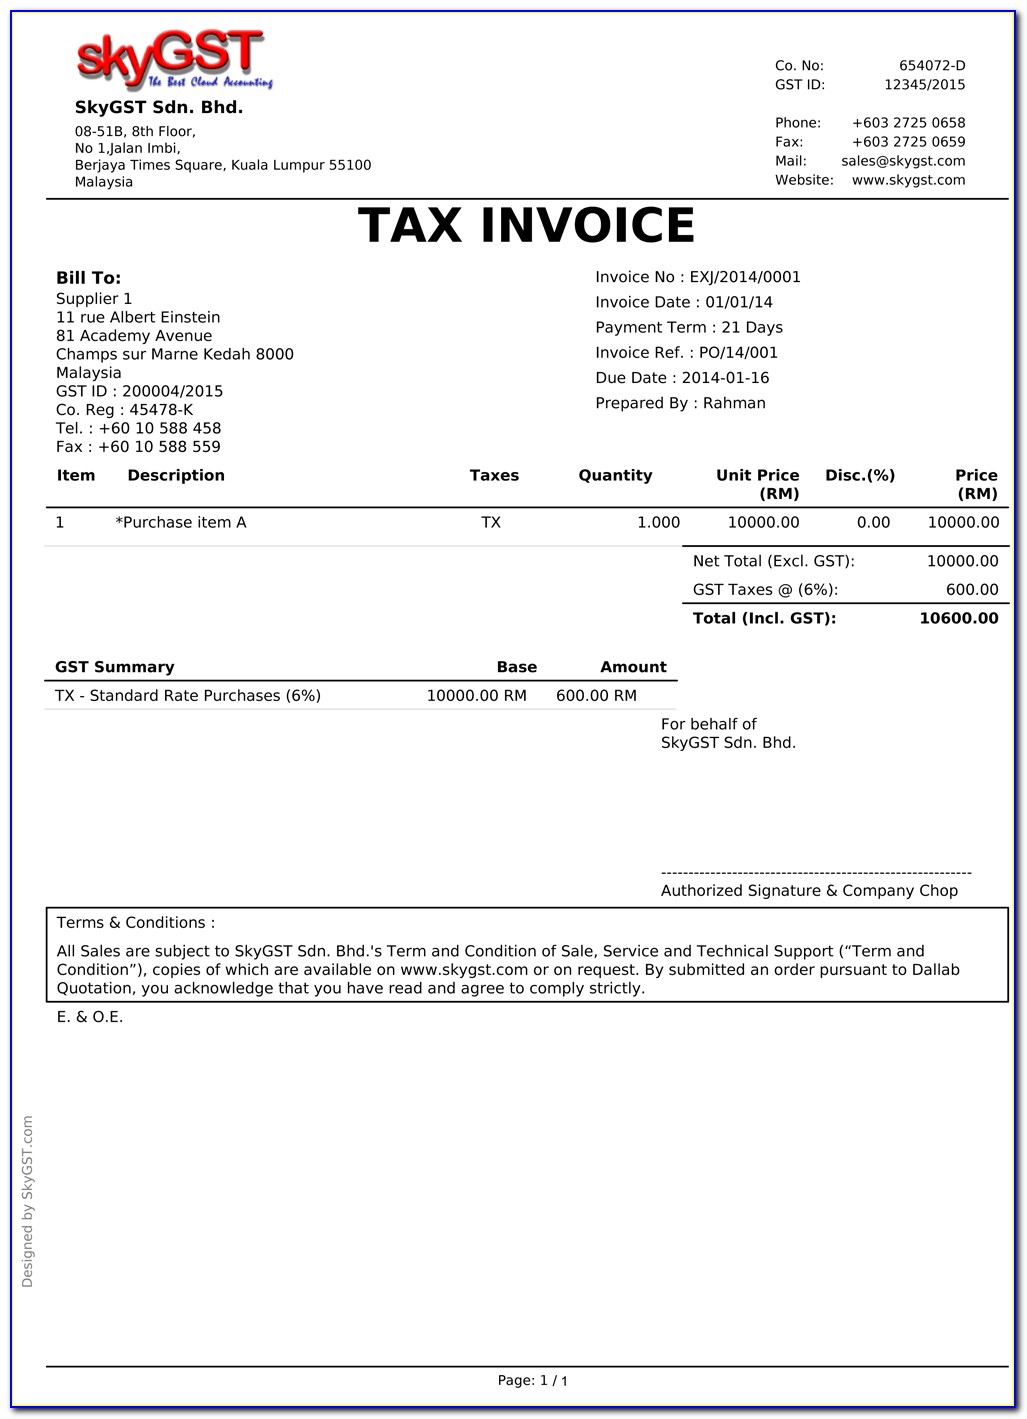 Sample Invoice Letter For Services Rendered